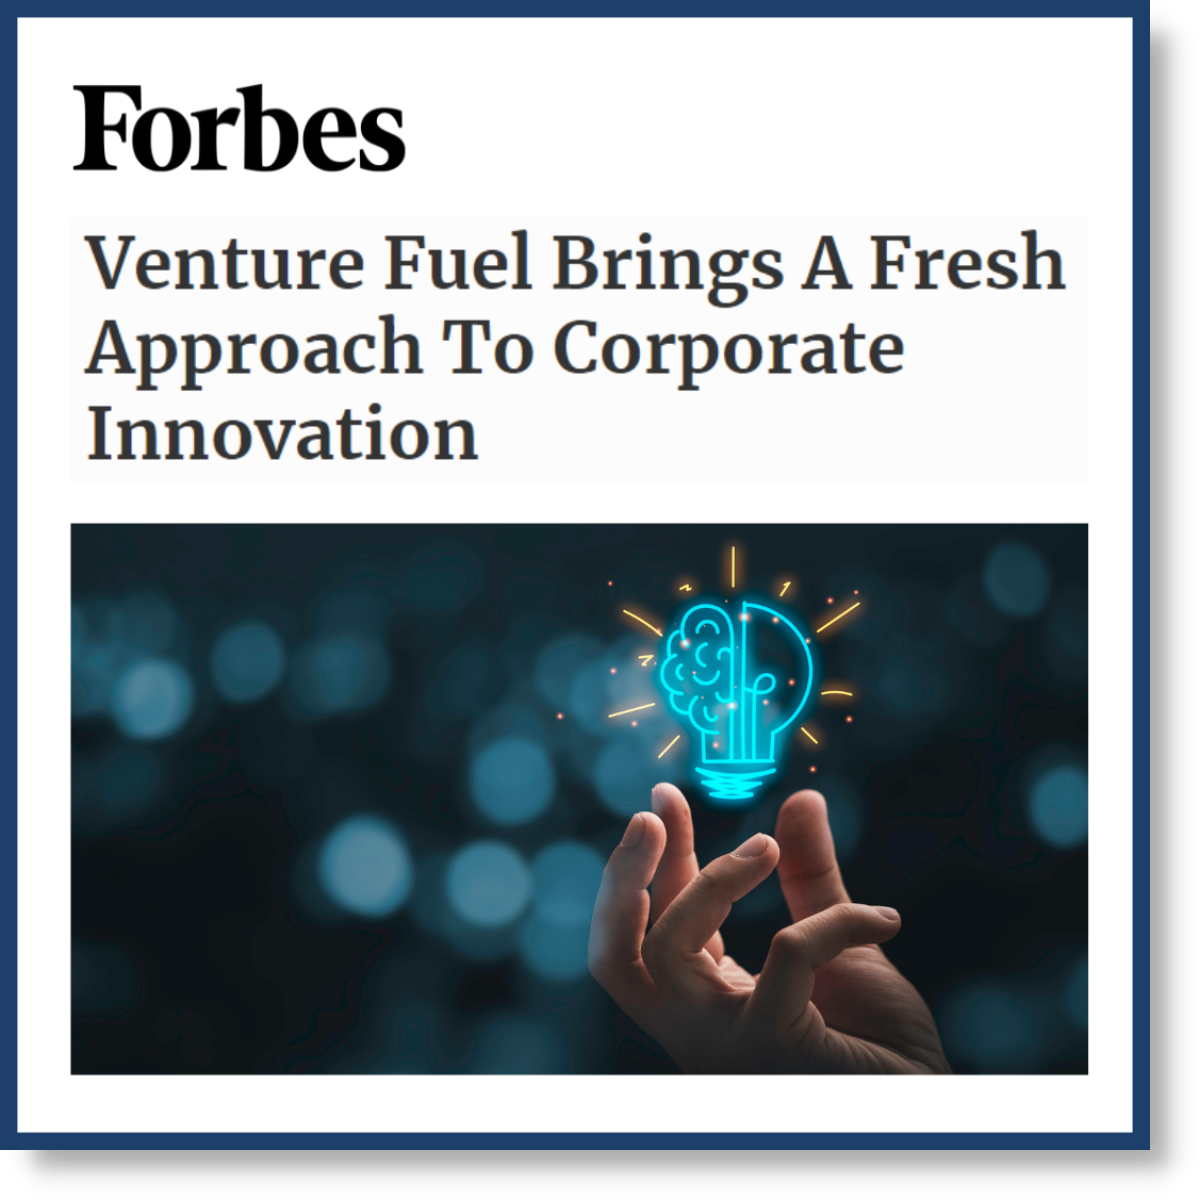 VentureFuel Brings A Fresh Approach To Corporate Innovation